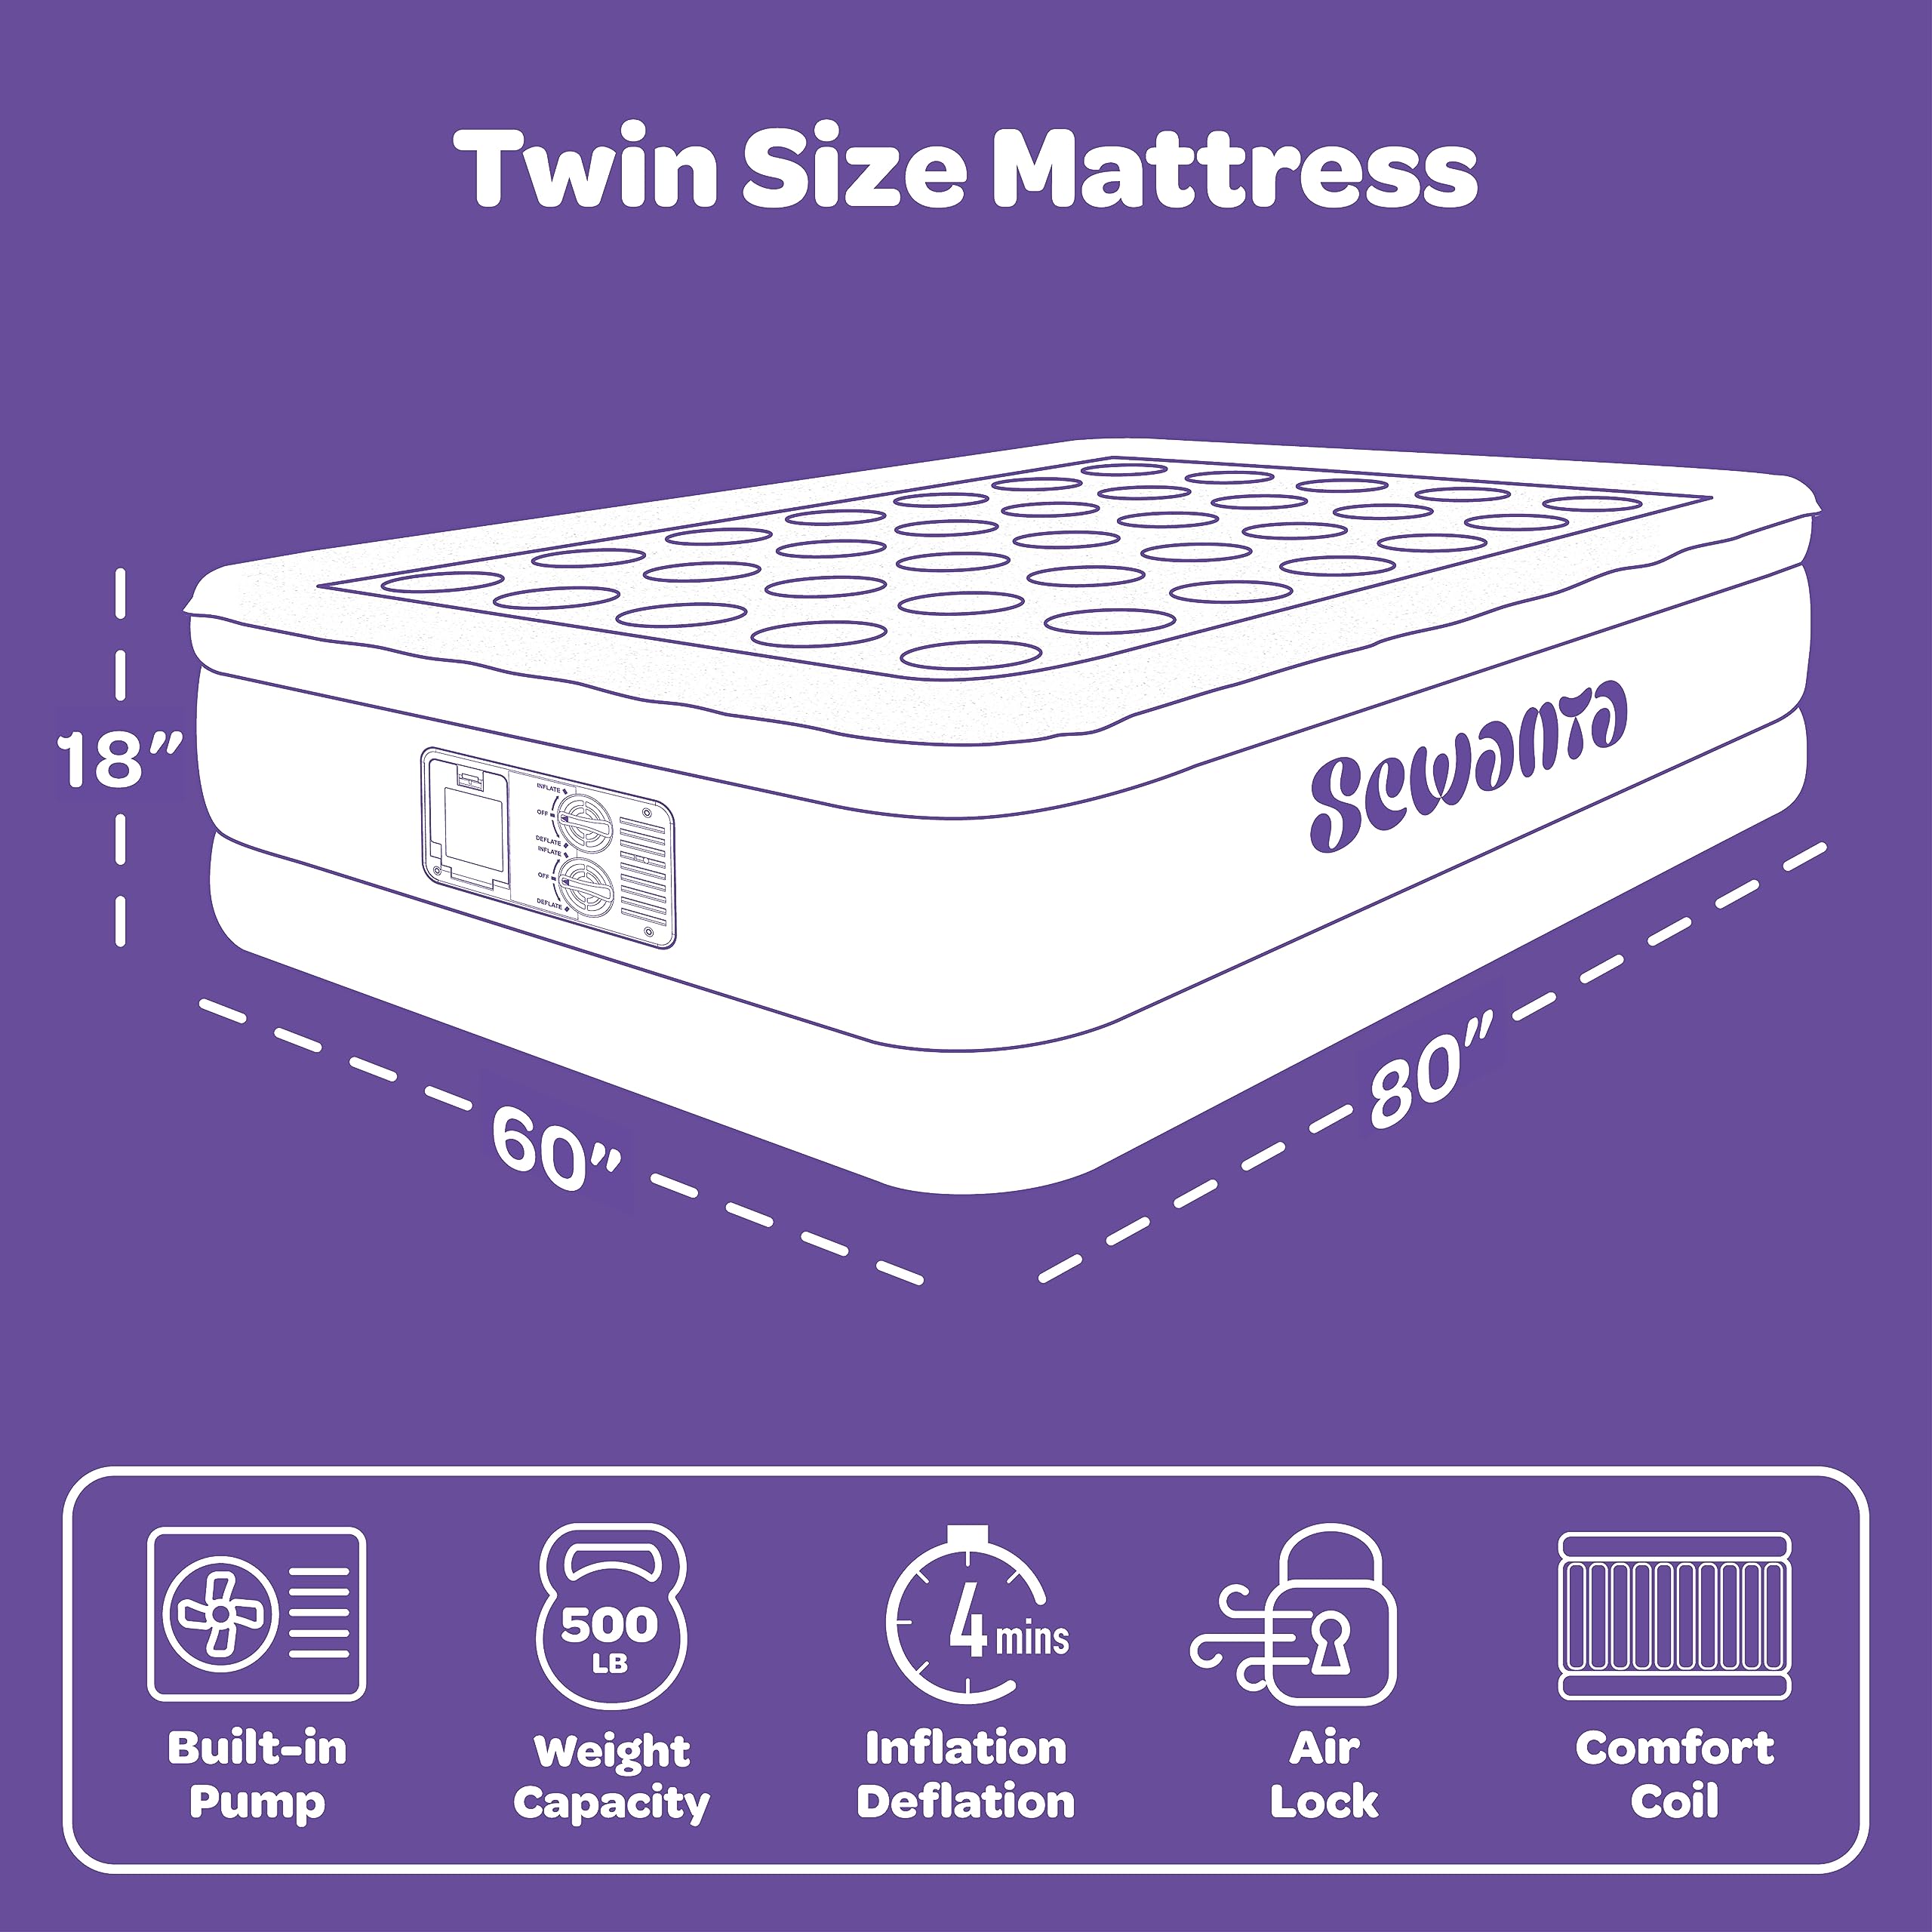 Air Mattress Queen Size, Luxury Air Mattress with Built in Pump, Plush Elevated with Comfort Coil Beam Technology - 18" Height Inflatable Mattress, Portable for Home/Camping/Guests (300Lb. Capacity)  - Very Good